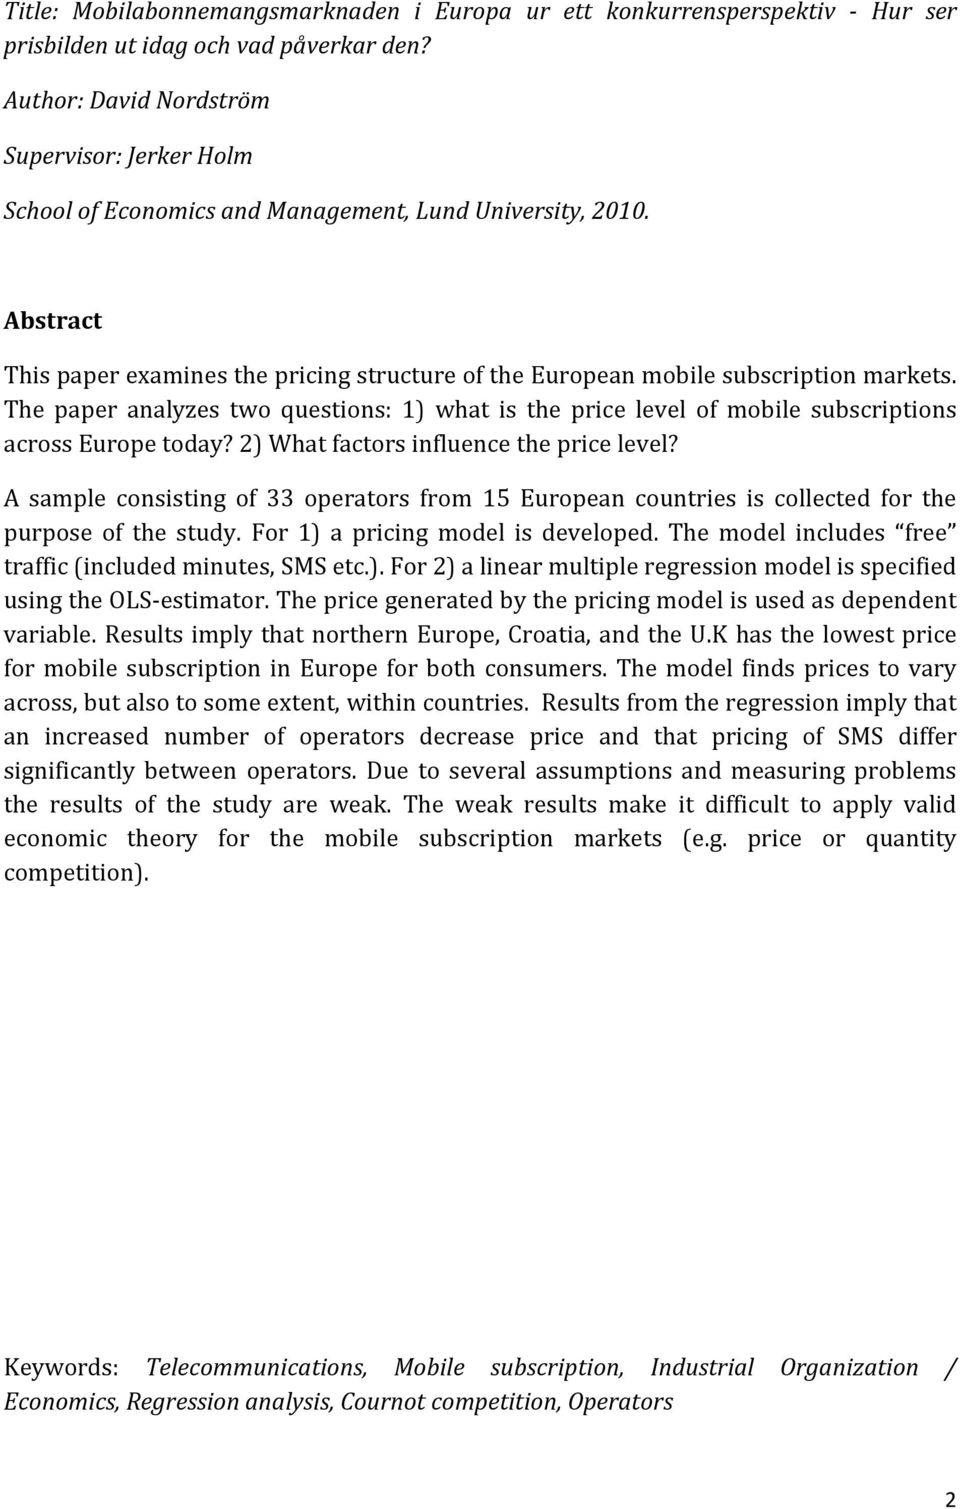 Abstract This paper examines the pricing structure of the European mobile subscription markets.